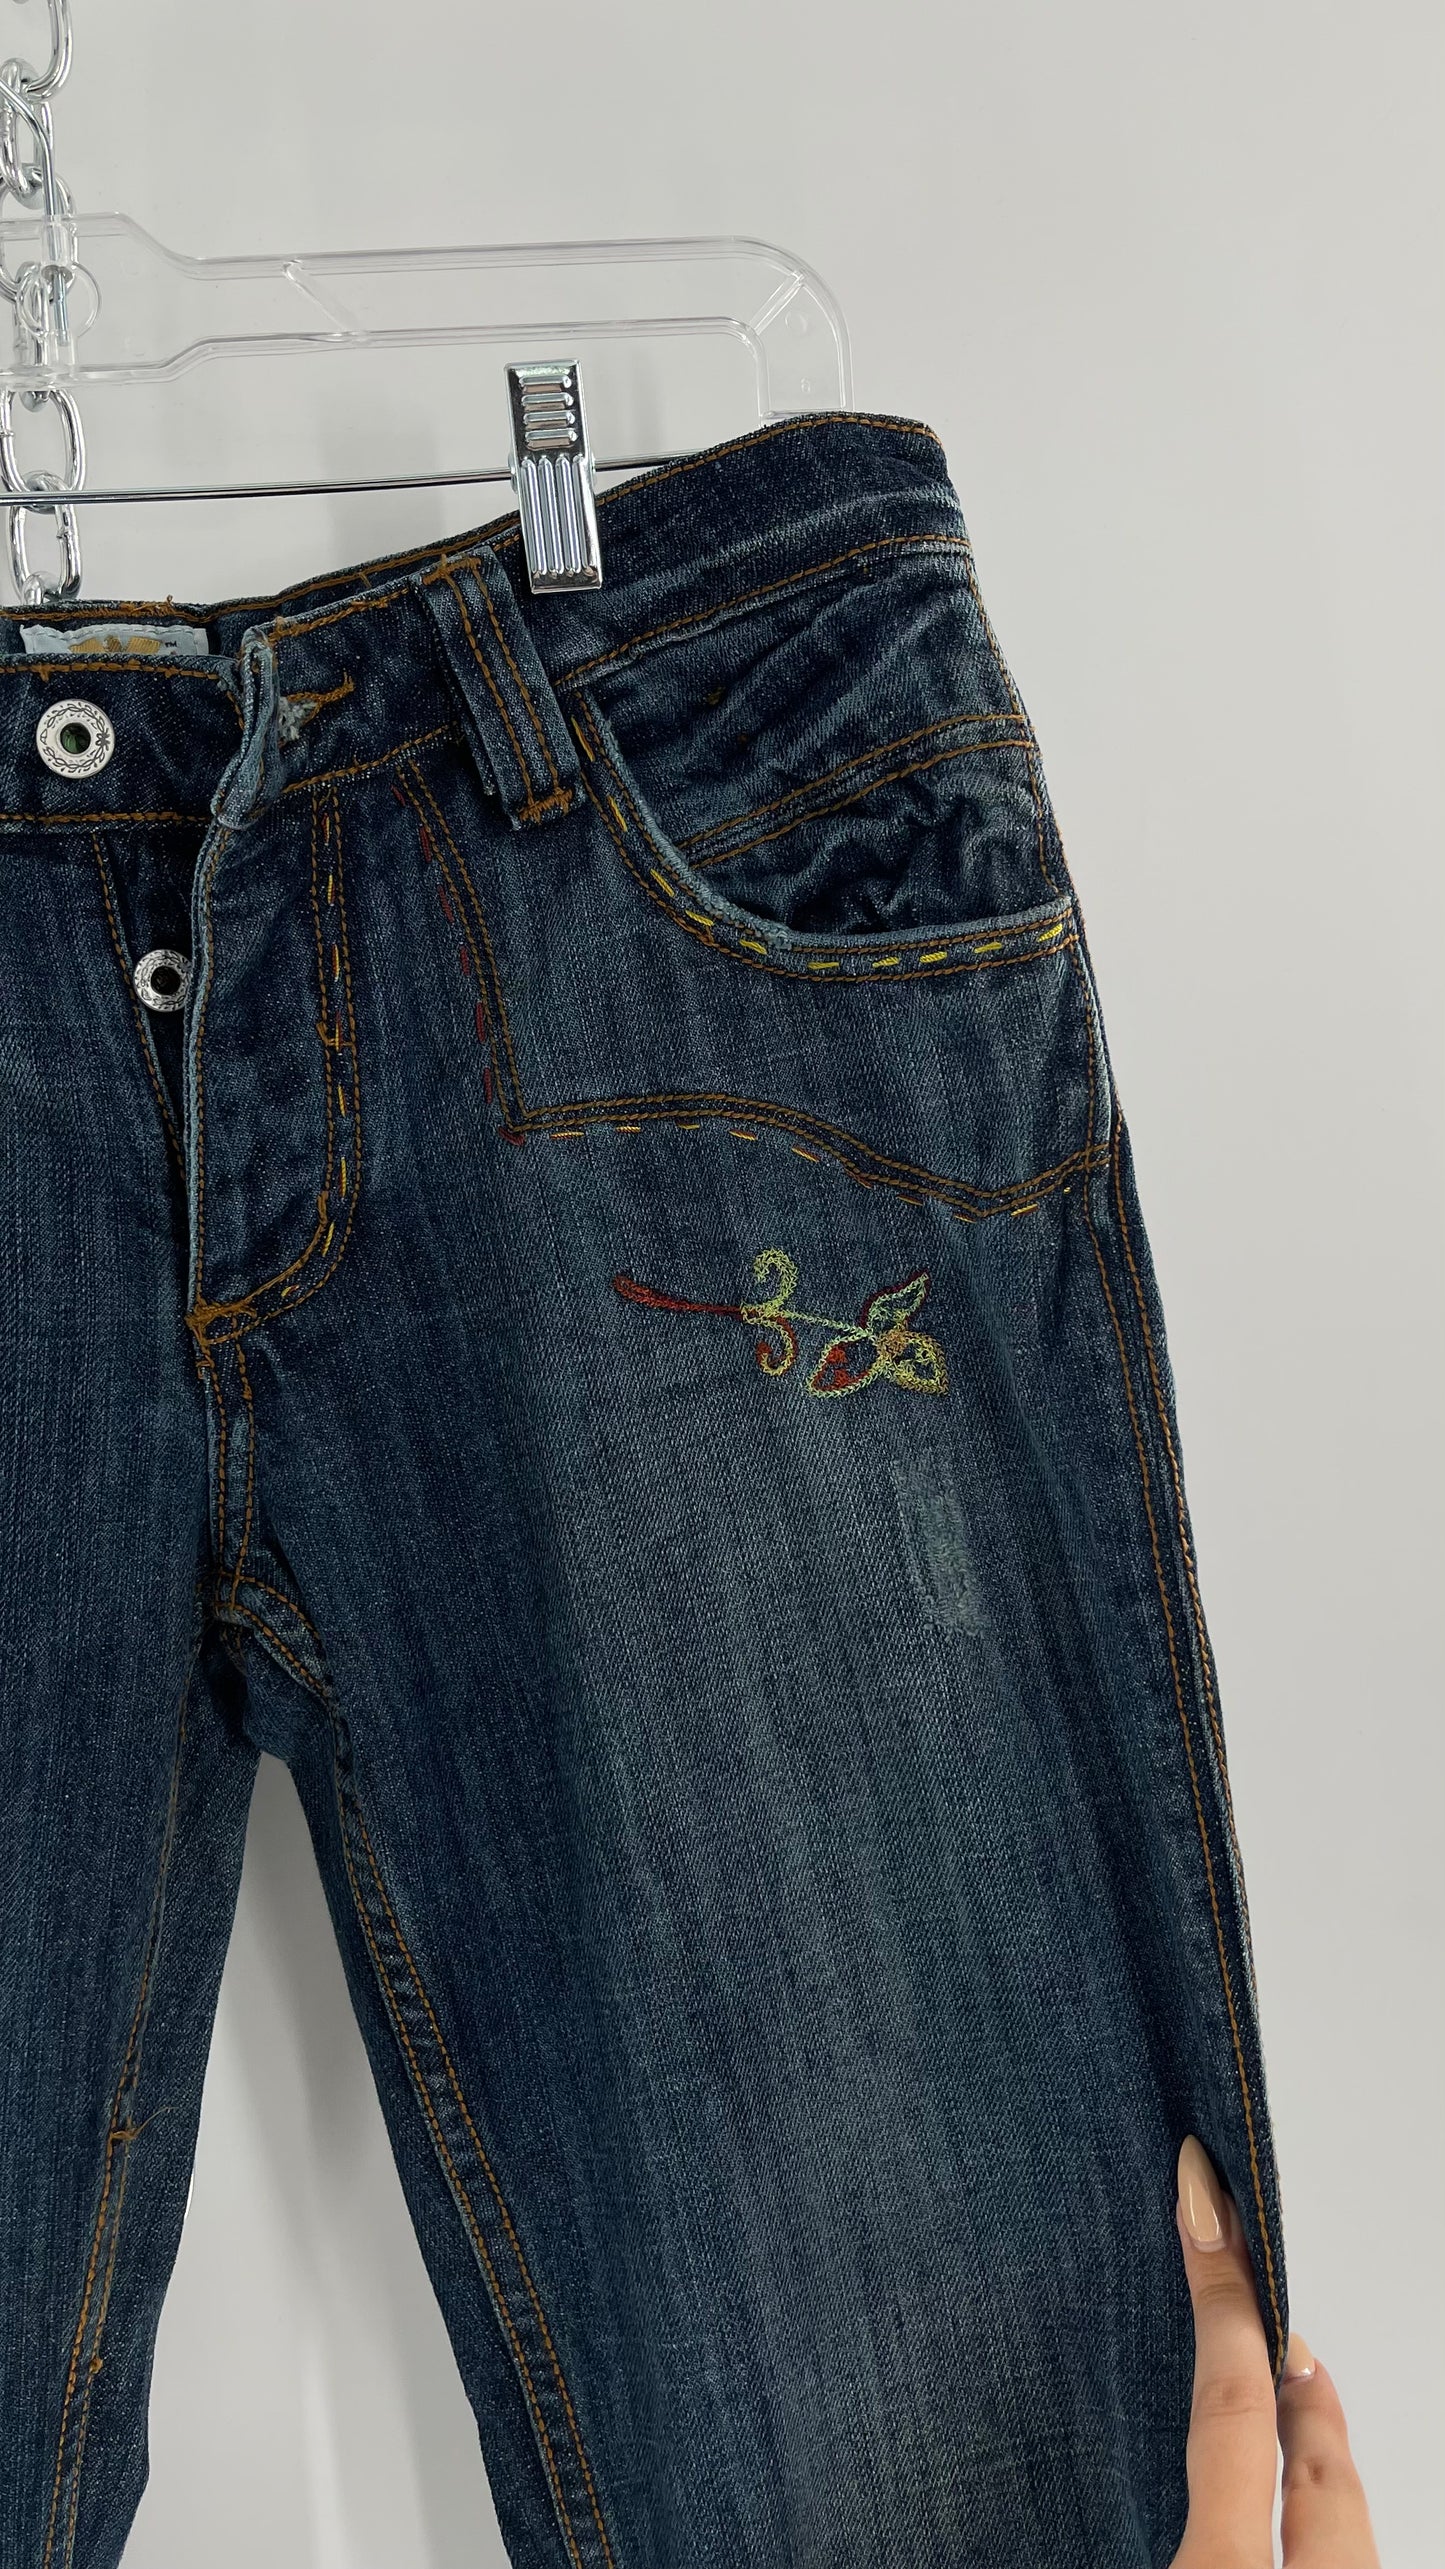 Vintage RARE Antik Denim Kick Flares with Embroidered Flower Design and Contrast Stitching (28)